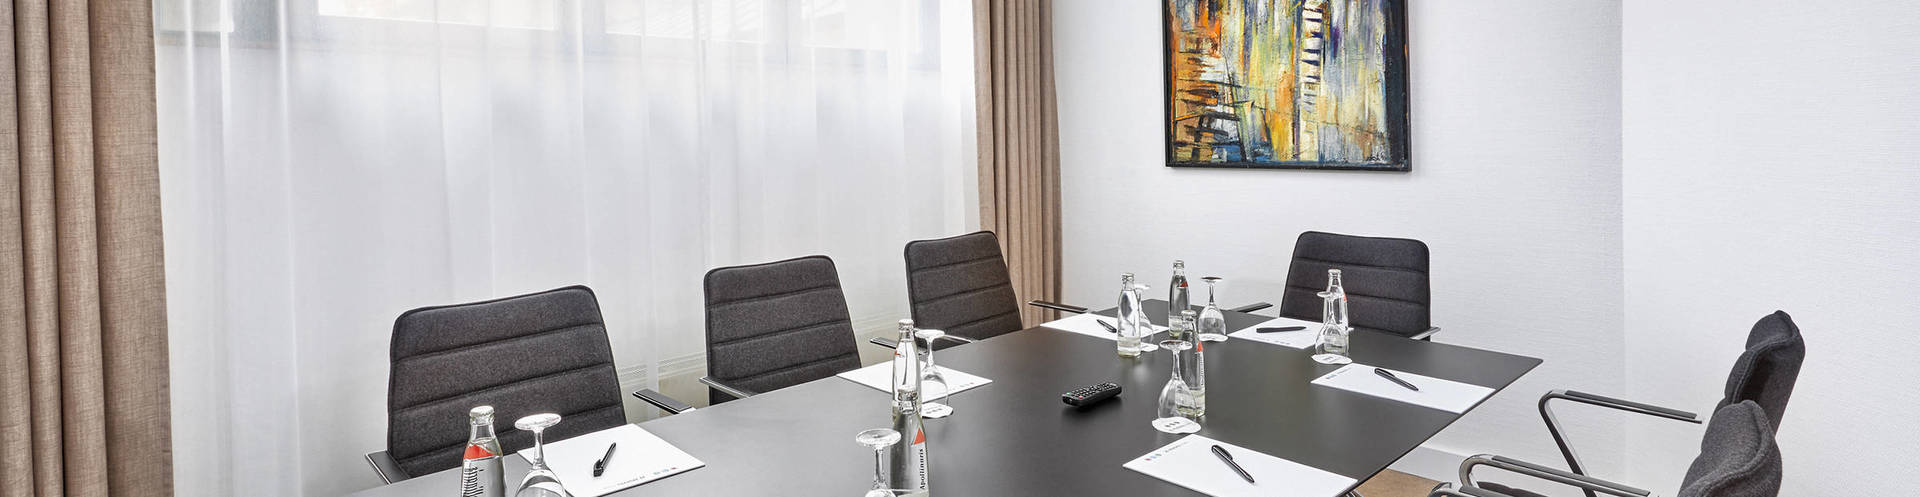 Fully equipped meeting rooms at the H+ Hotel Limes Thermen Aalen - Official website